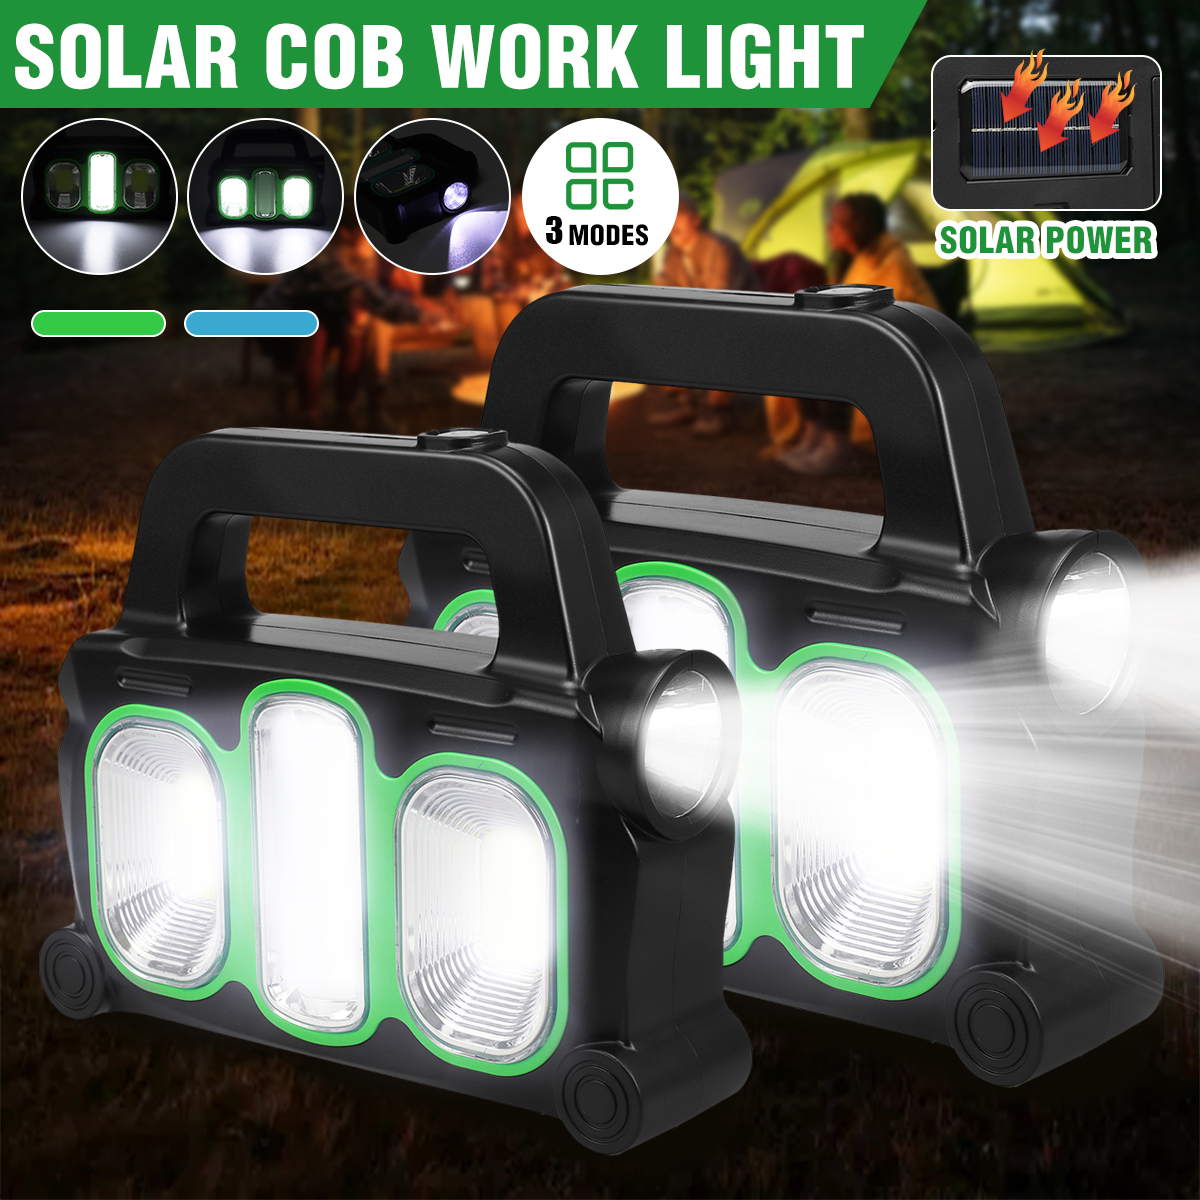 COB-LED-Solar-Work-Lights-IP65-Waterproof-3-Mode-USB-Rechargeable-Portable-Floodlight-Lamps-Outdoor--1924944-1